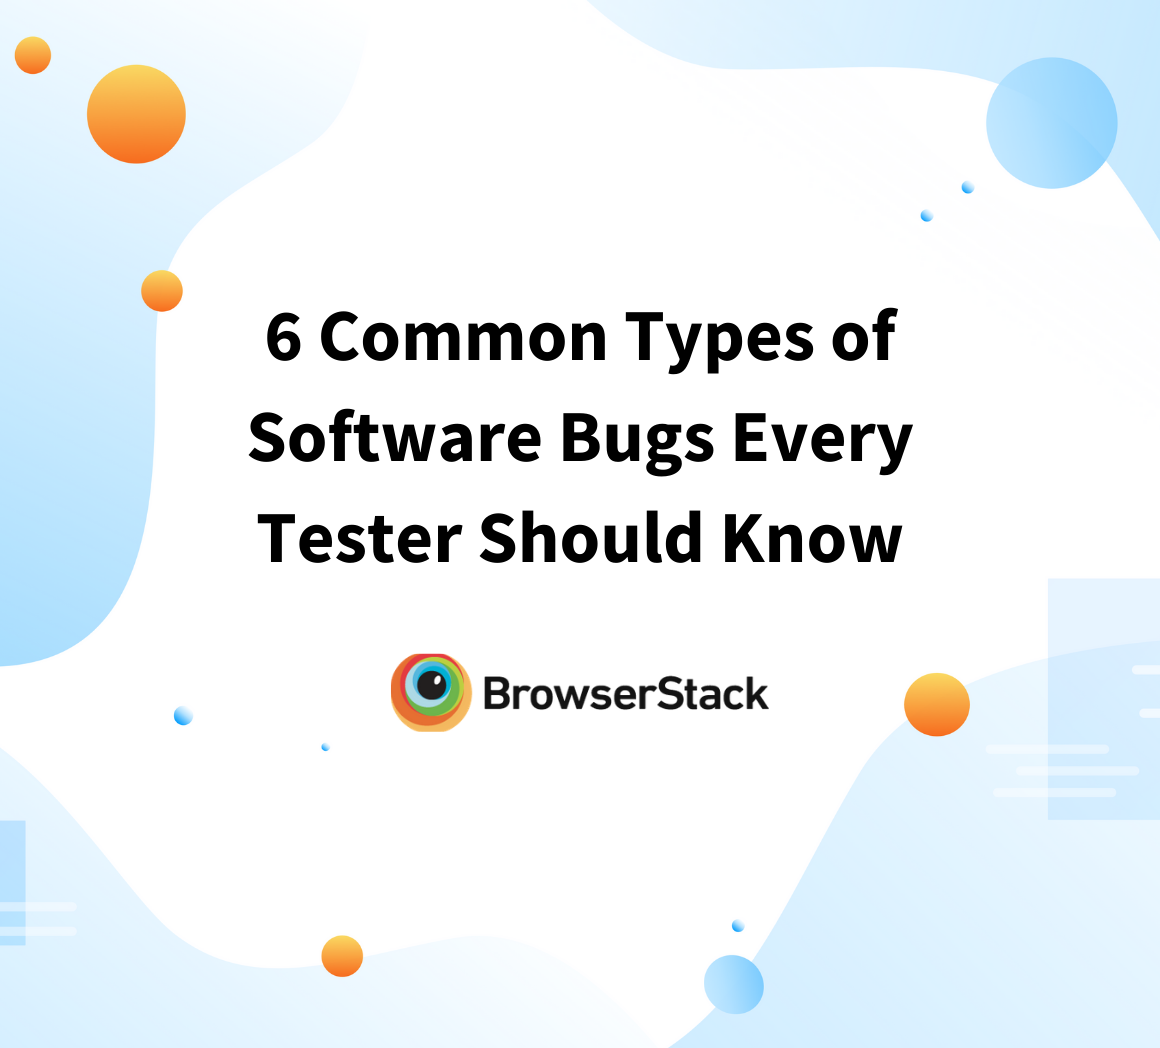 6 Common Types of Software Bugs Every Tester Should Know